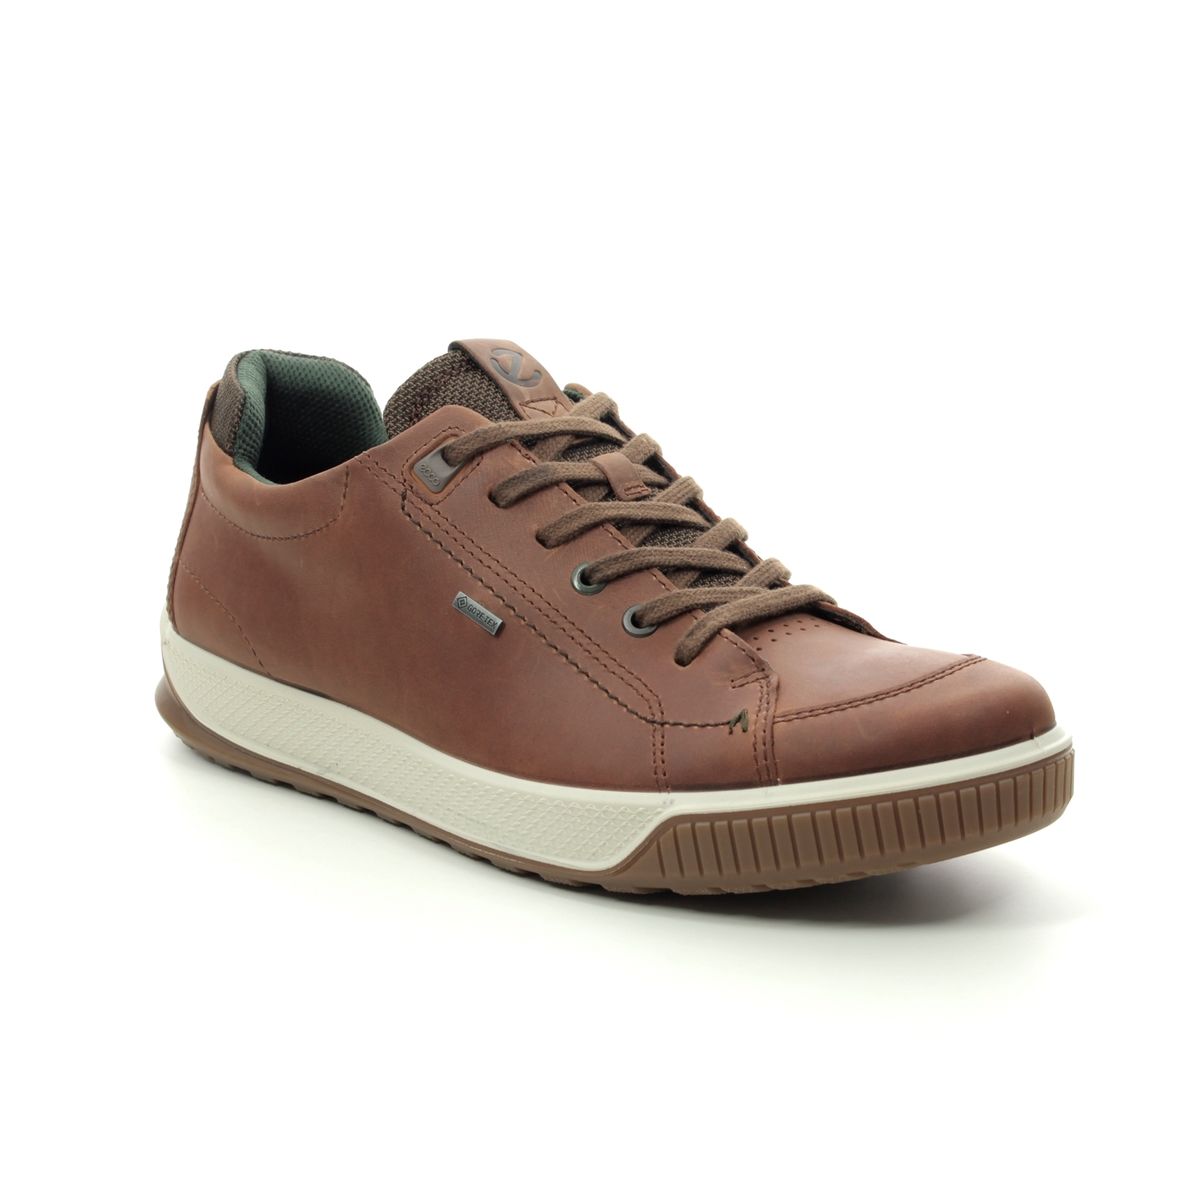 ECCO Byway Tred Gore Tan Leather Mens comfort shoes 501824-02280 in a Plain Leather in Size 41